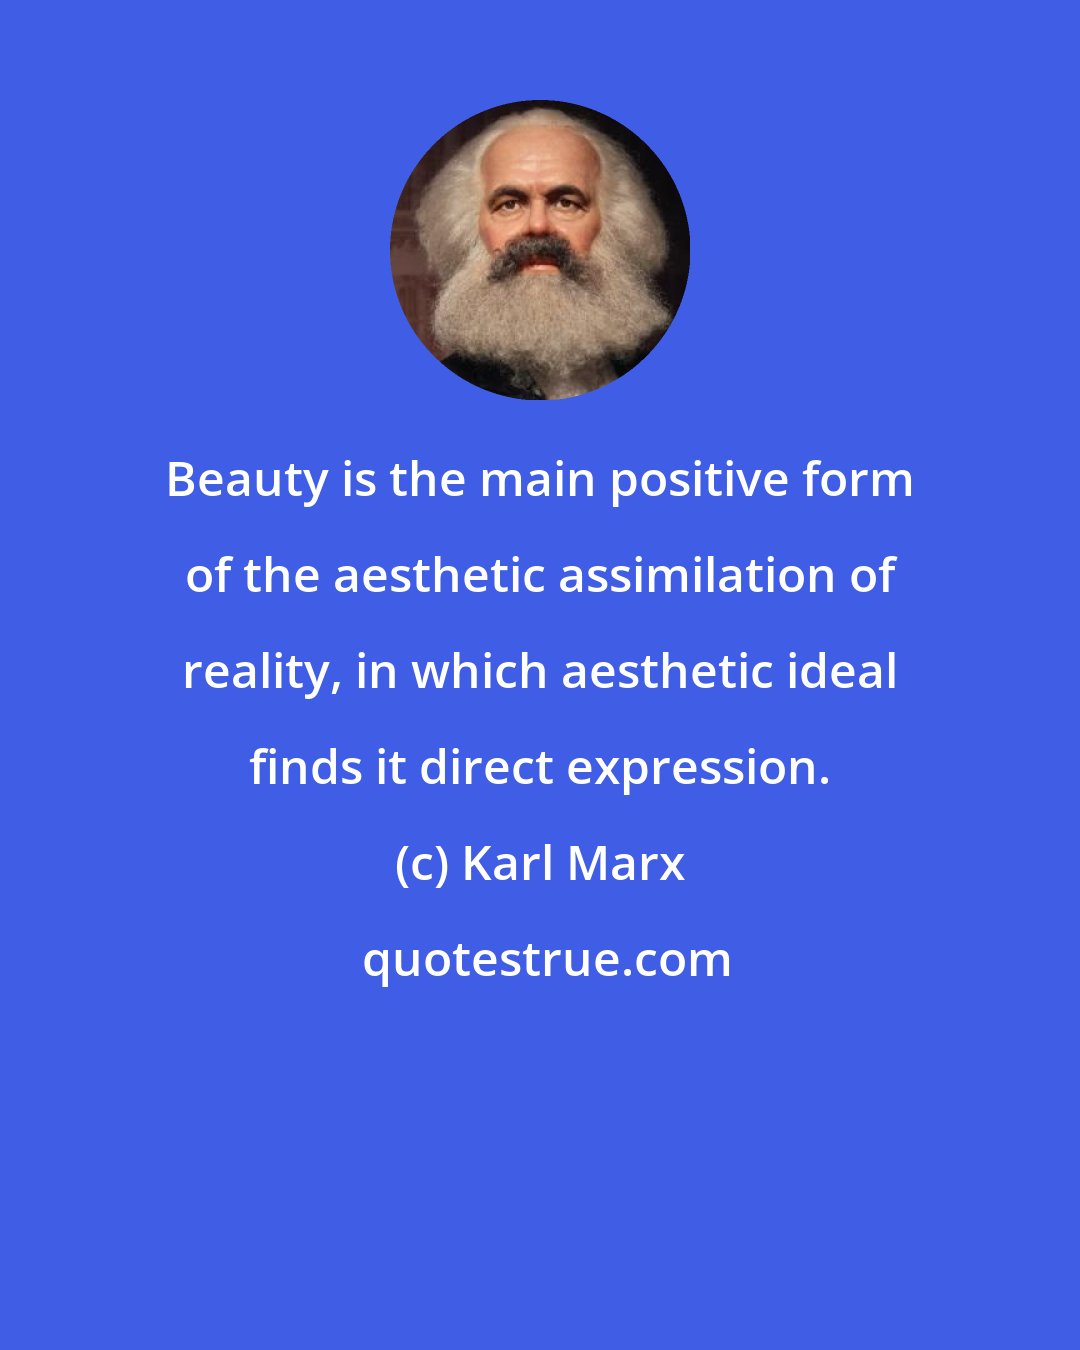 Karl Marx: Beauty is the main positive form of the aesthetic assimilation of reality, in which aesthetic ideal finds it direct expression.